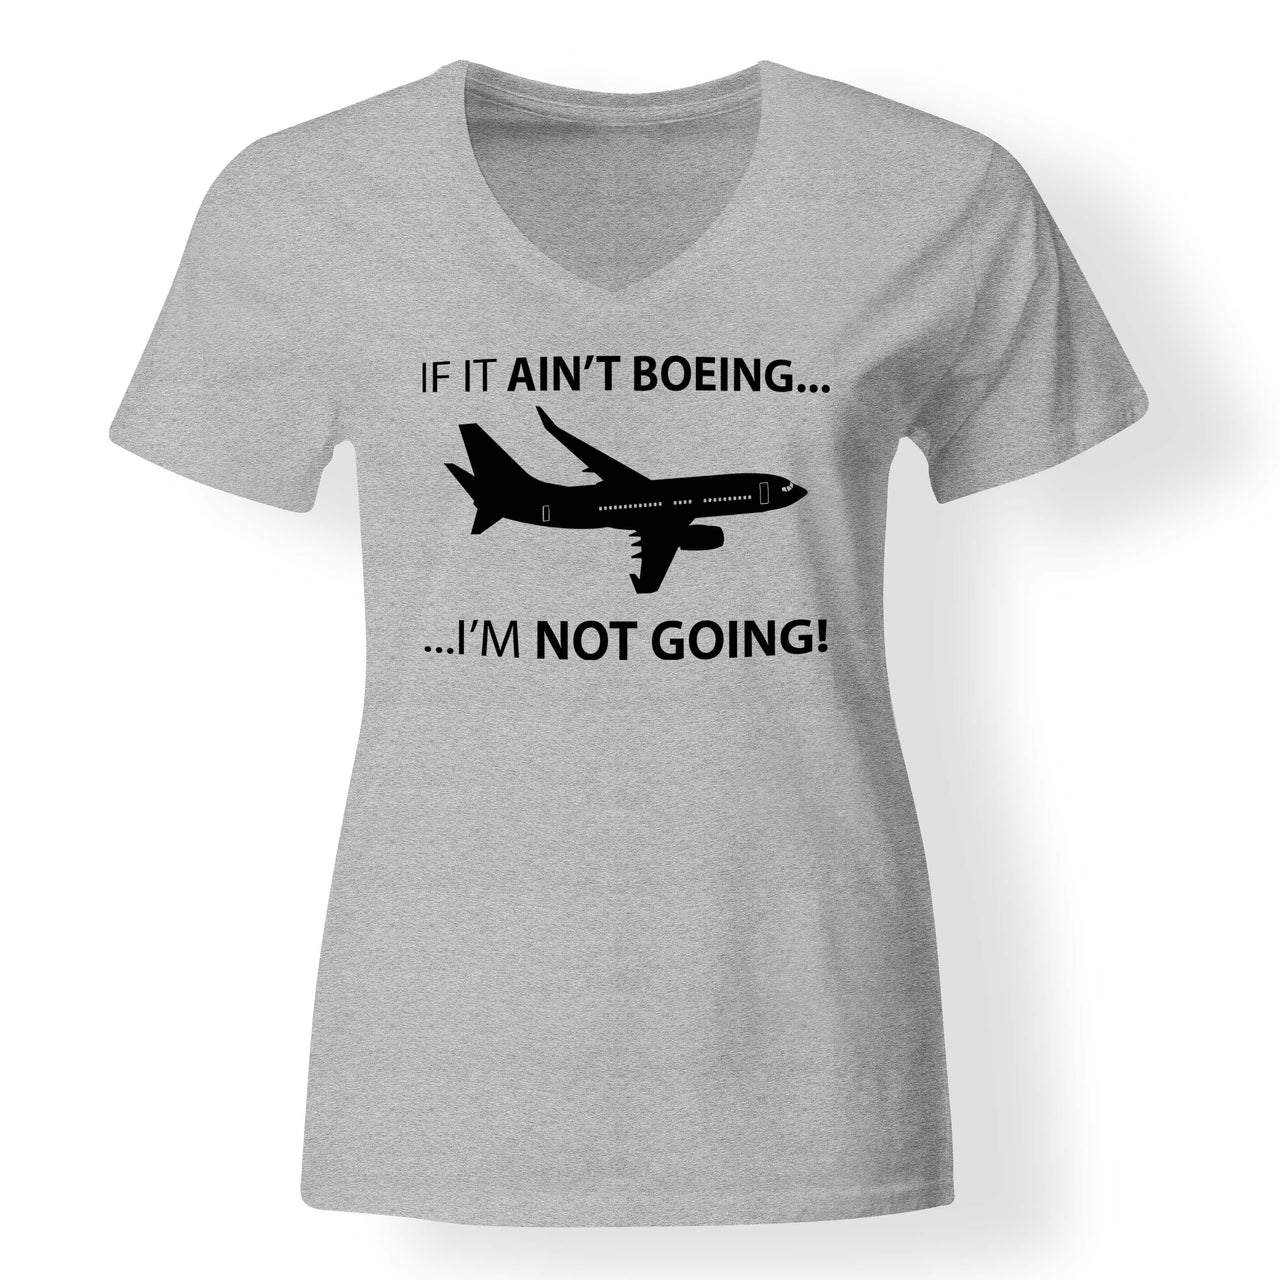 If It Ain't Boeing I'm Not Going! Designed V-Neck T-Shirts